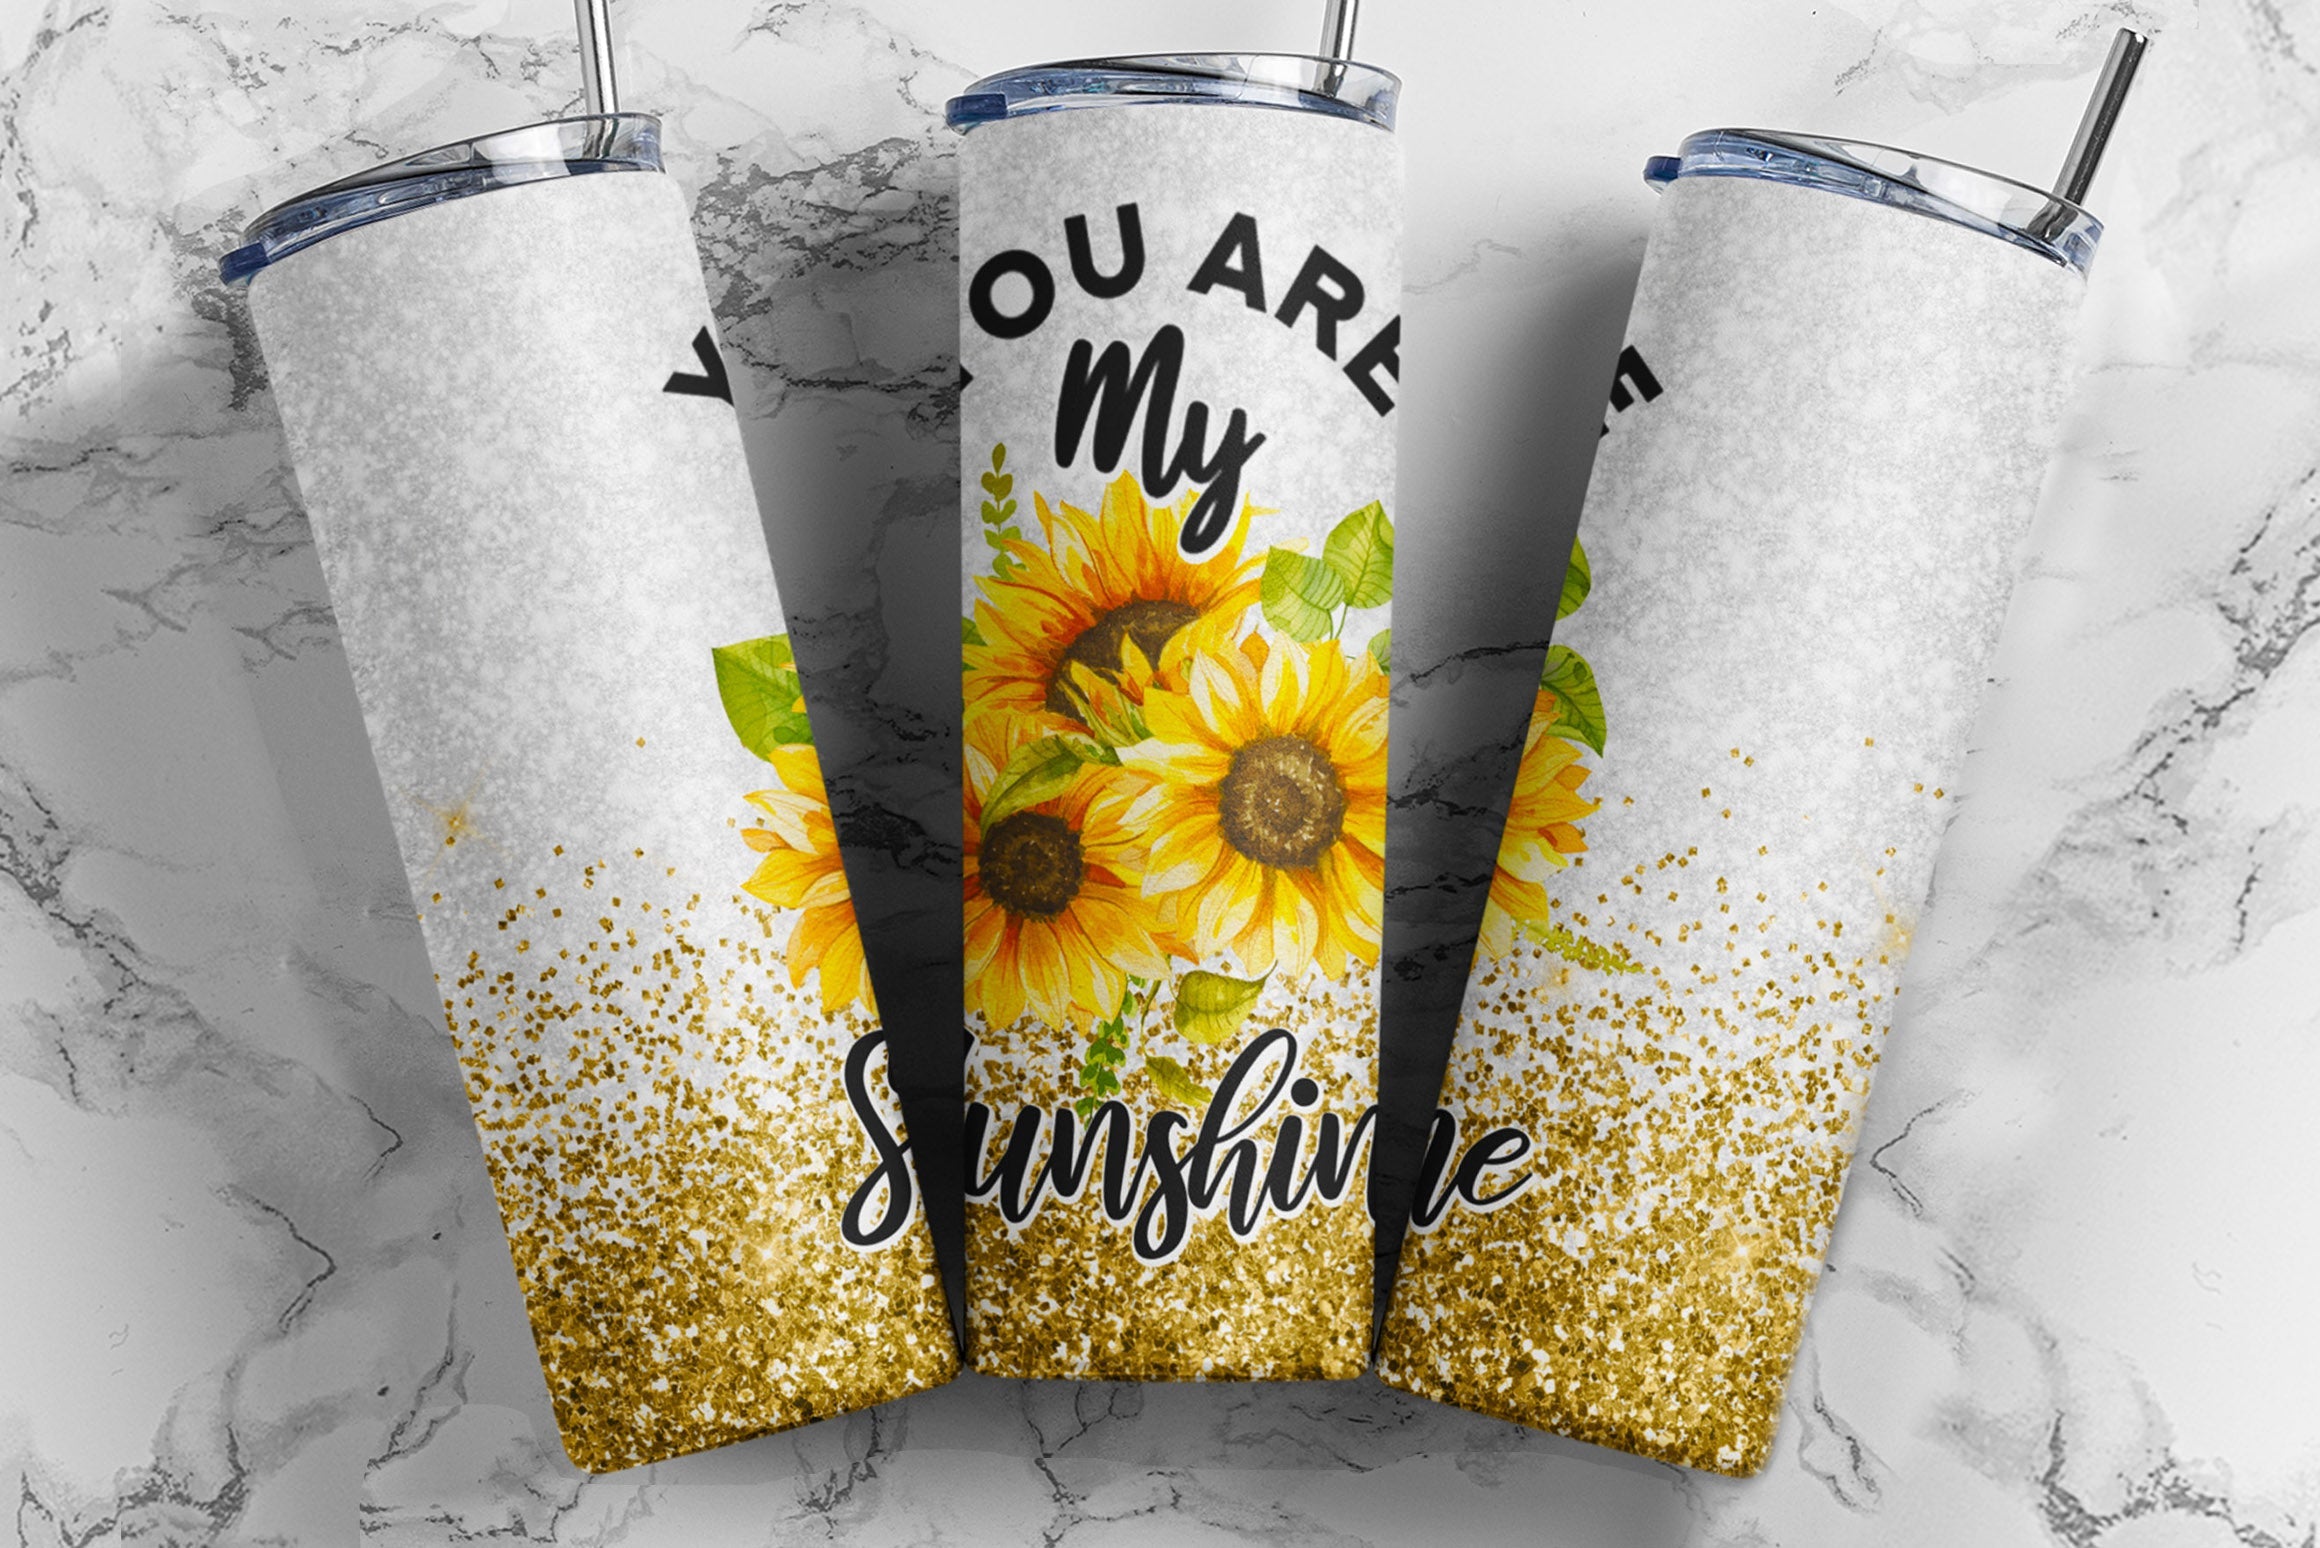 Tumbler toppers – SSUPhoto Designs